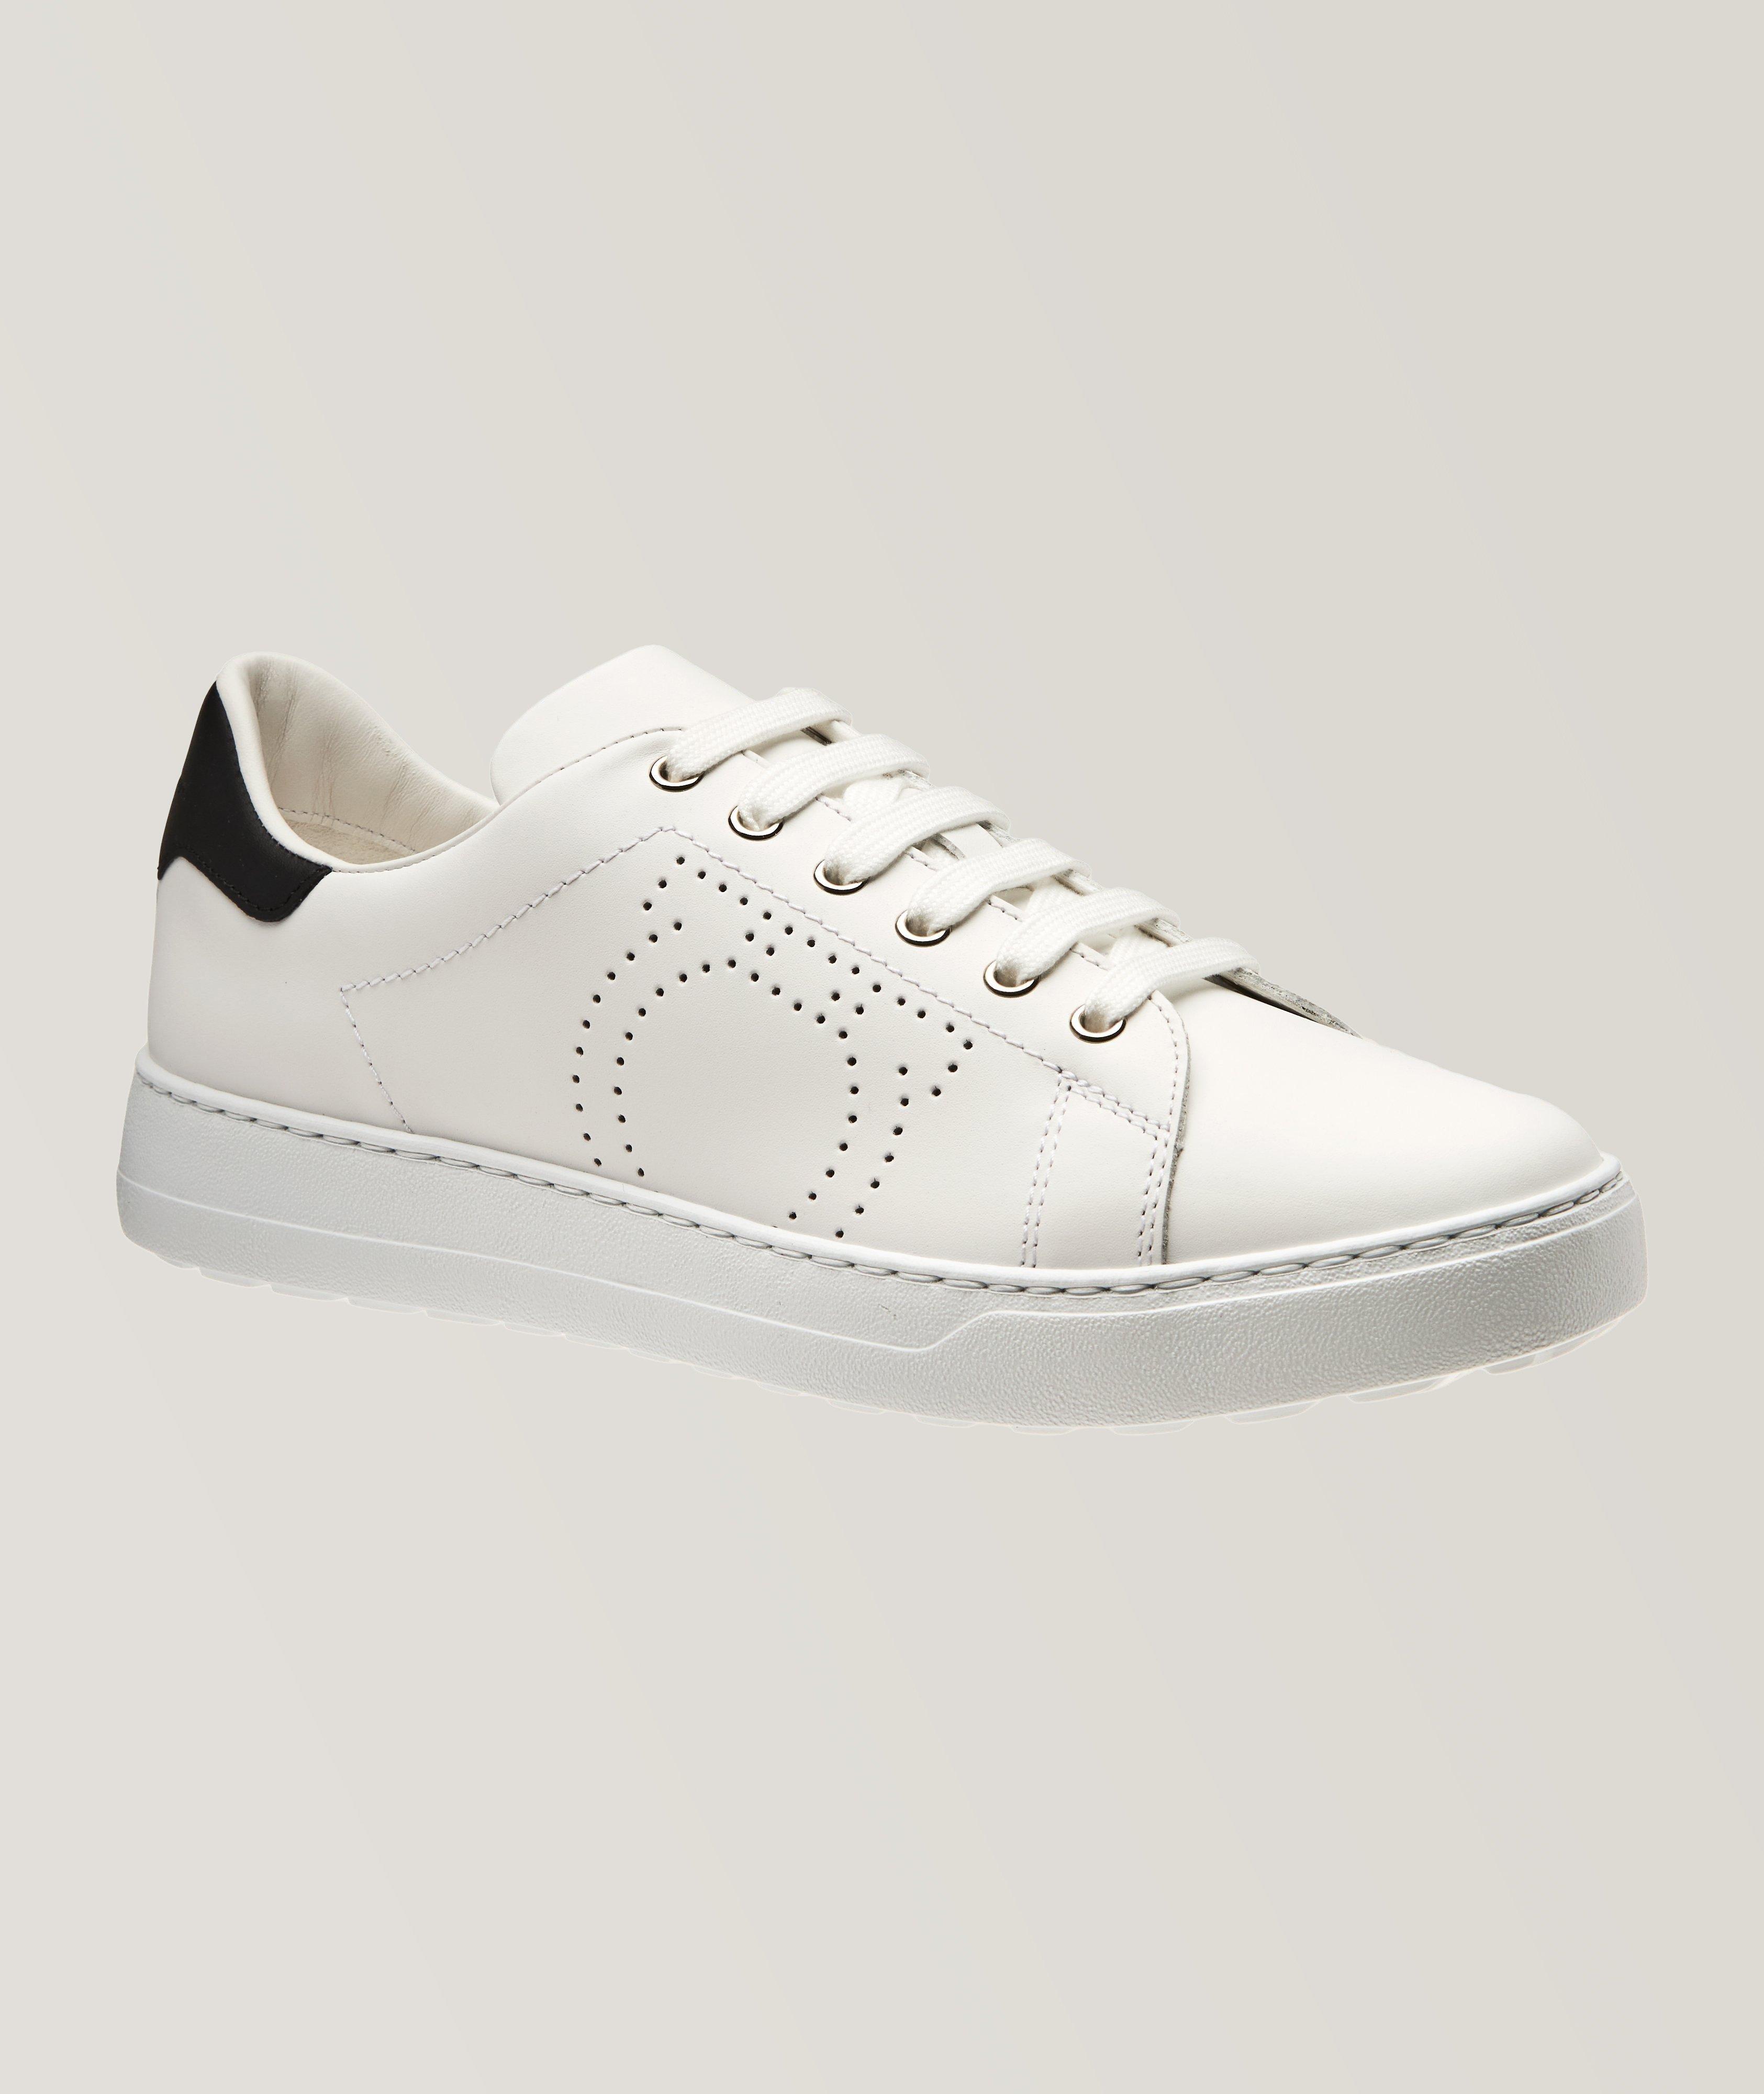 Pierre Leather Sneakers image 0